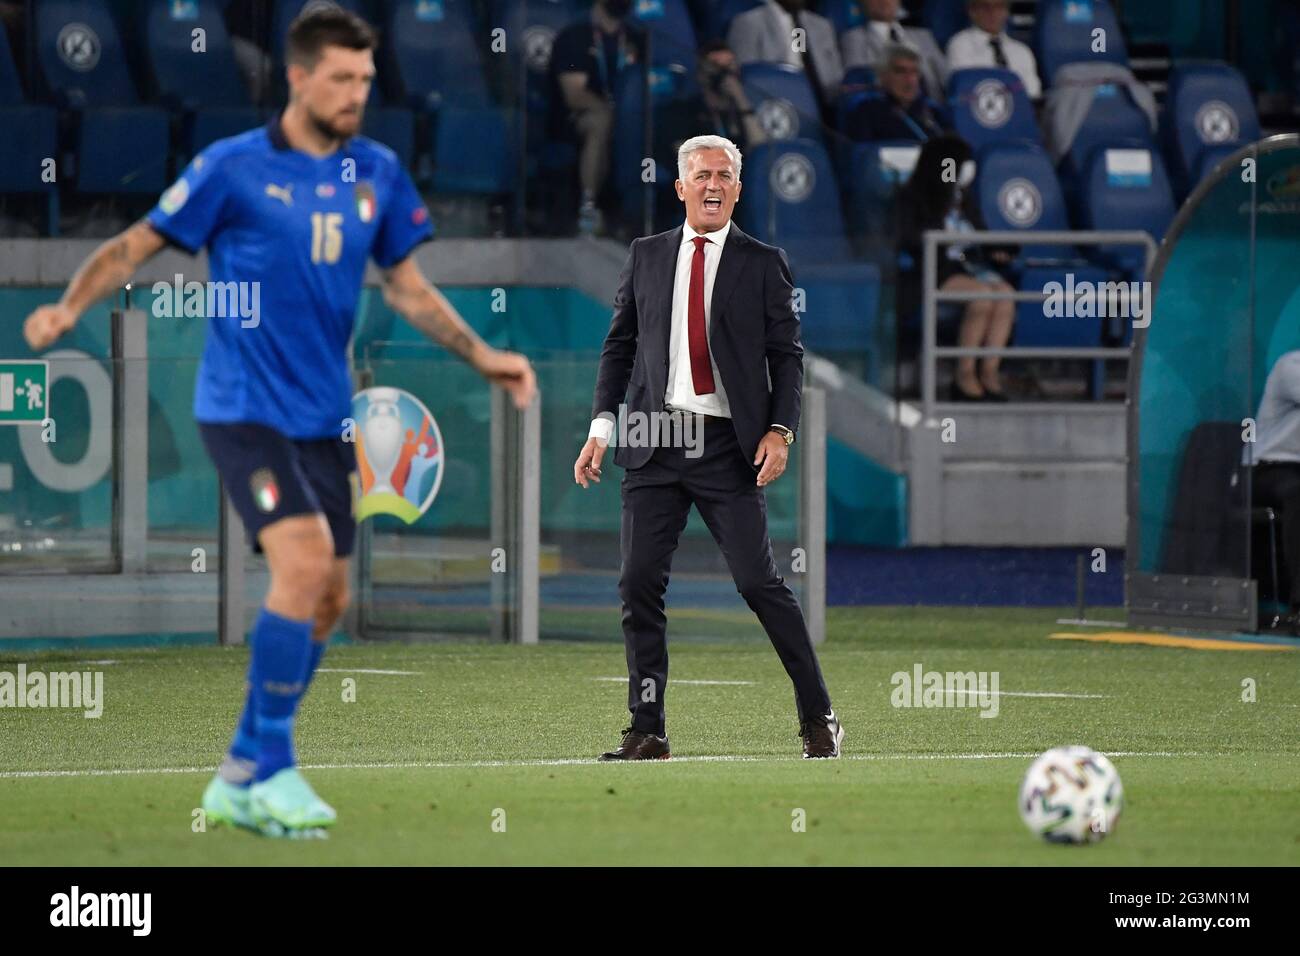 Roma, Italy. 16th June, 2021. Vladimir Petkovic coach of Switzerland during the Uefa Euro 2020 Group stage - Group A football match between Italy and Switzerland at stadio Olimpico in Rome (Italy), June 16th, 2021. Photo Andrea Staccioli/Insidefoto Credit: insidefoto srl/Alamy Live News Stock Photo